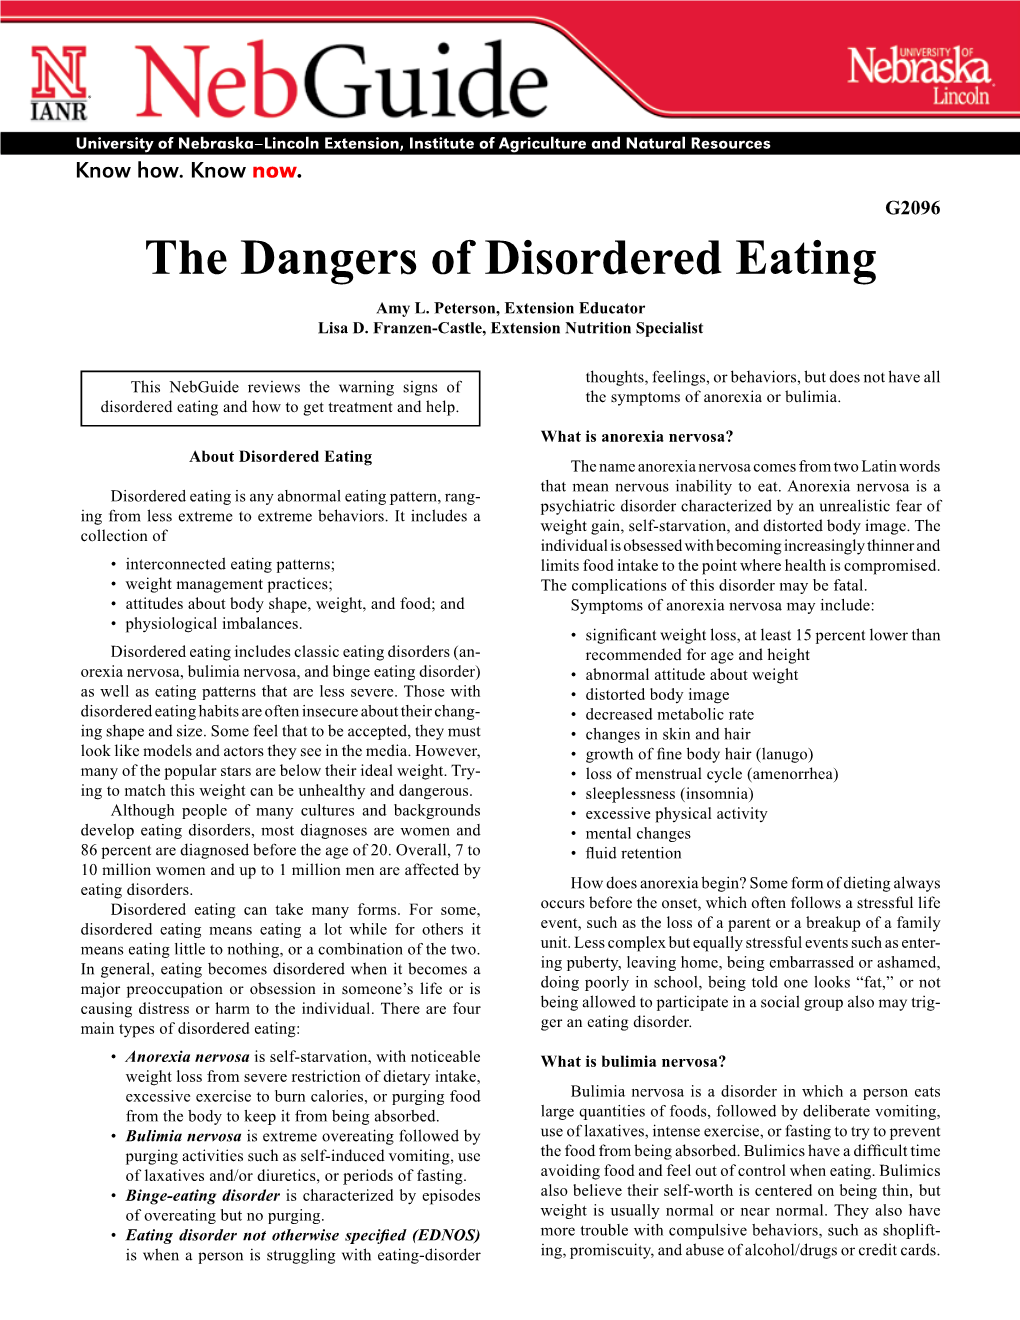 The Dangers of Disordered Eating Amy L